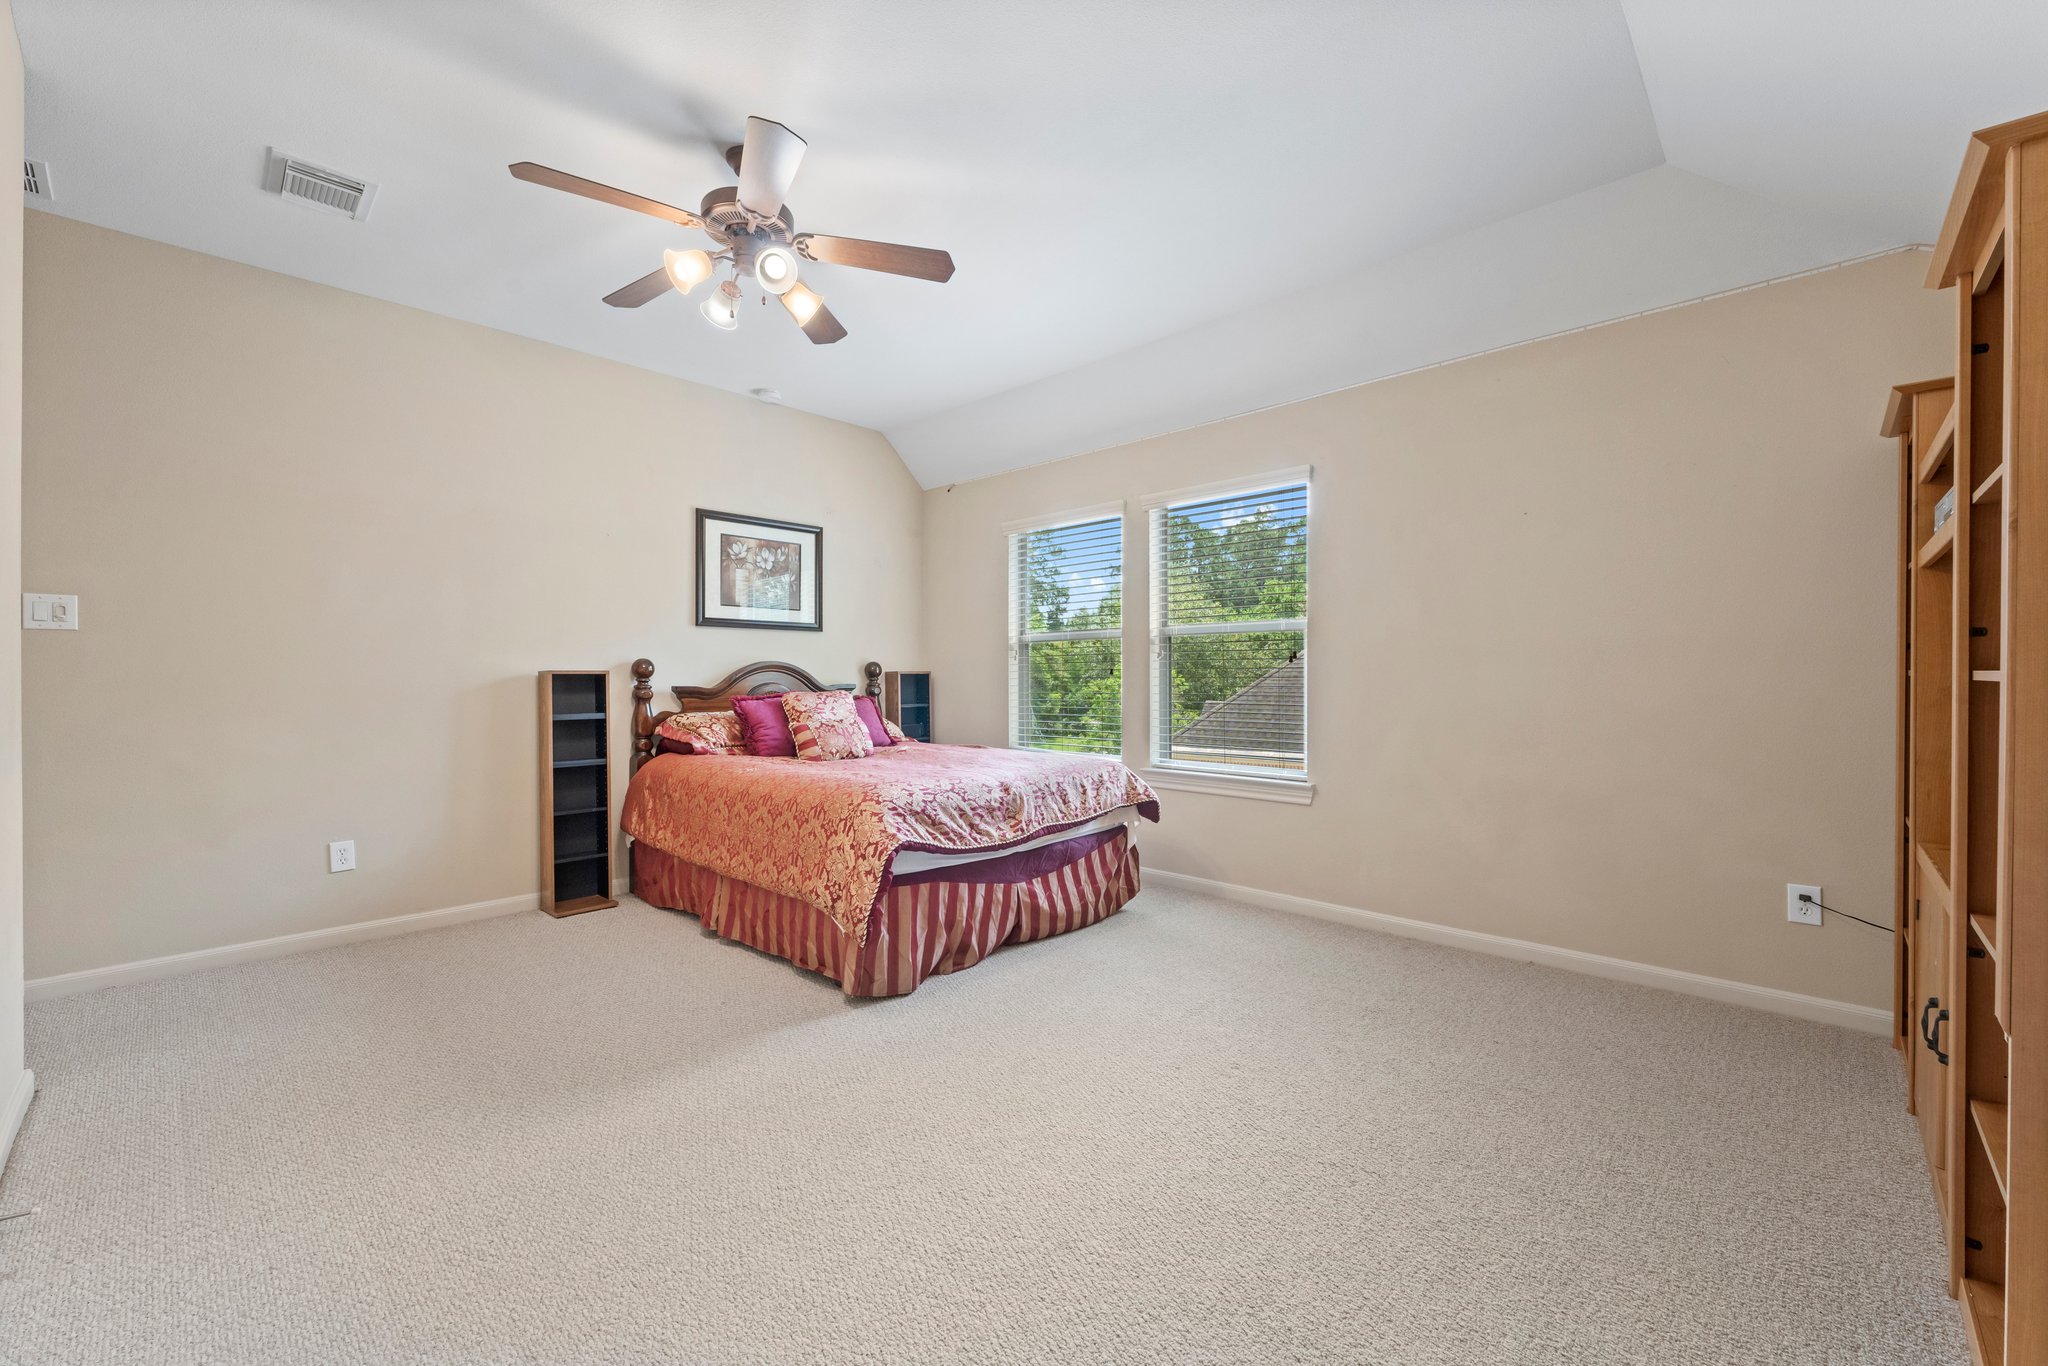 This large bedroom shows a queen bed and could easily be used as a media room.